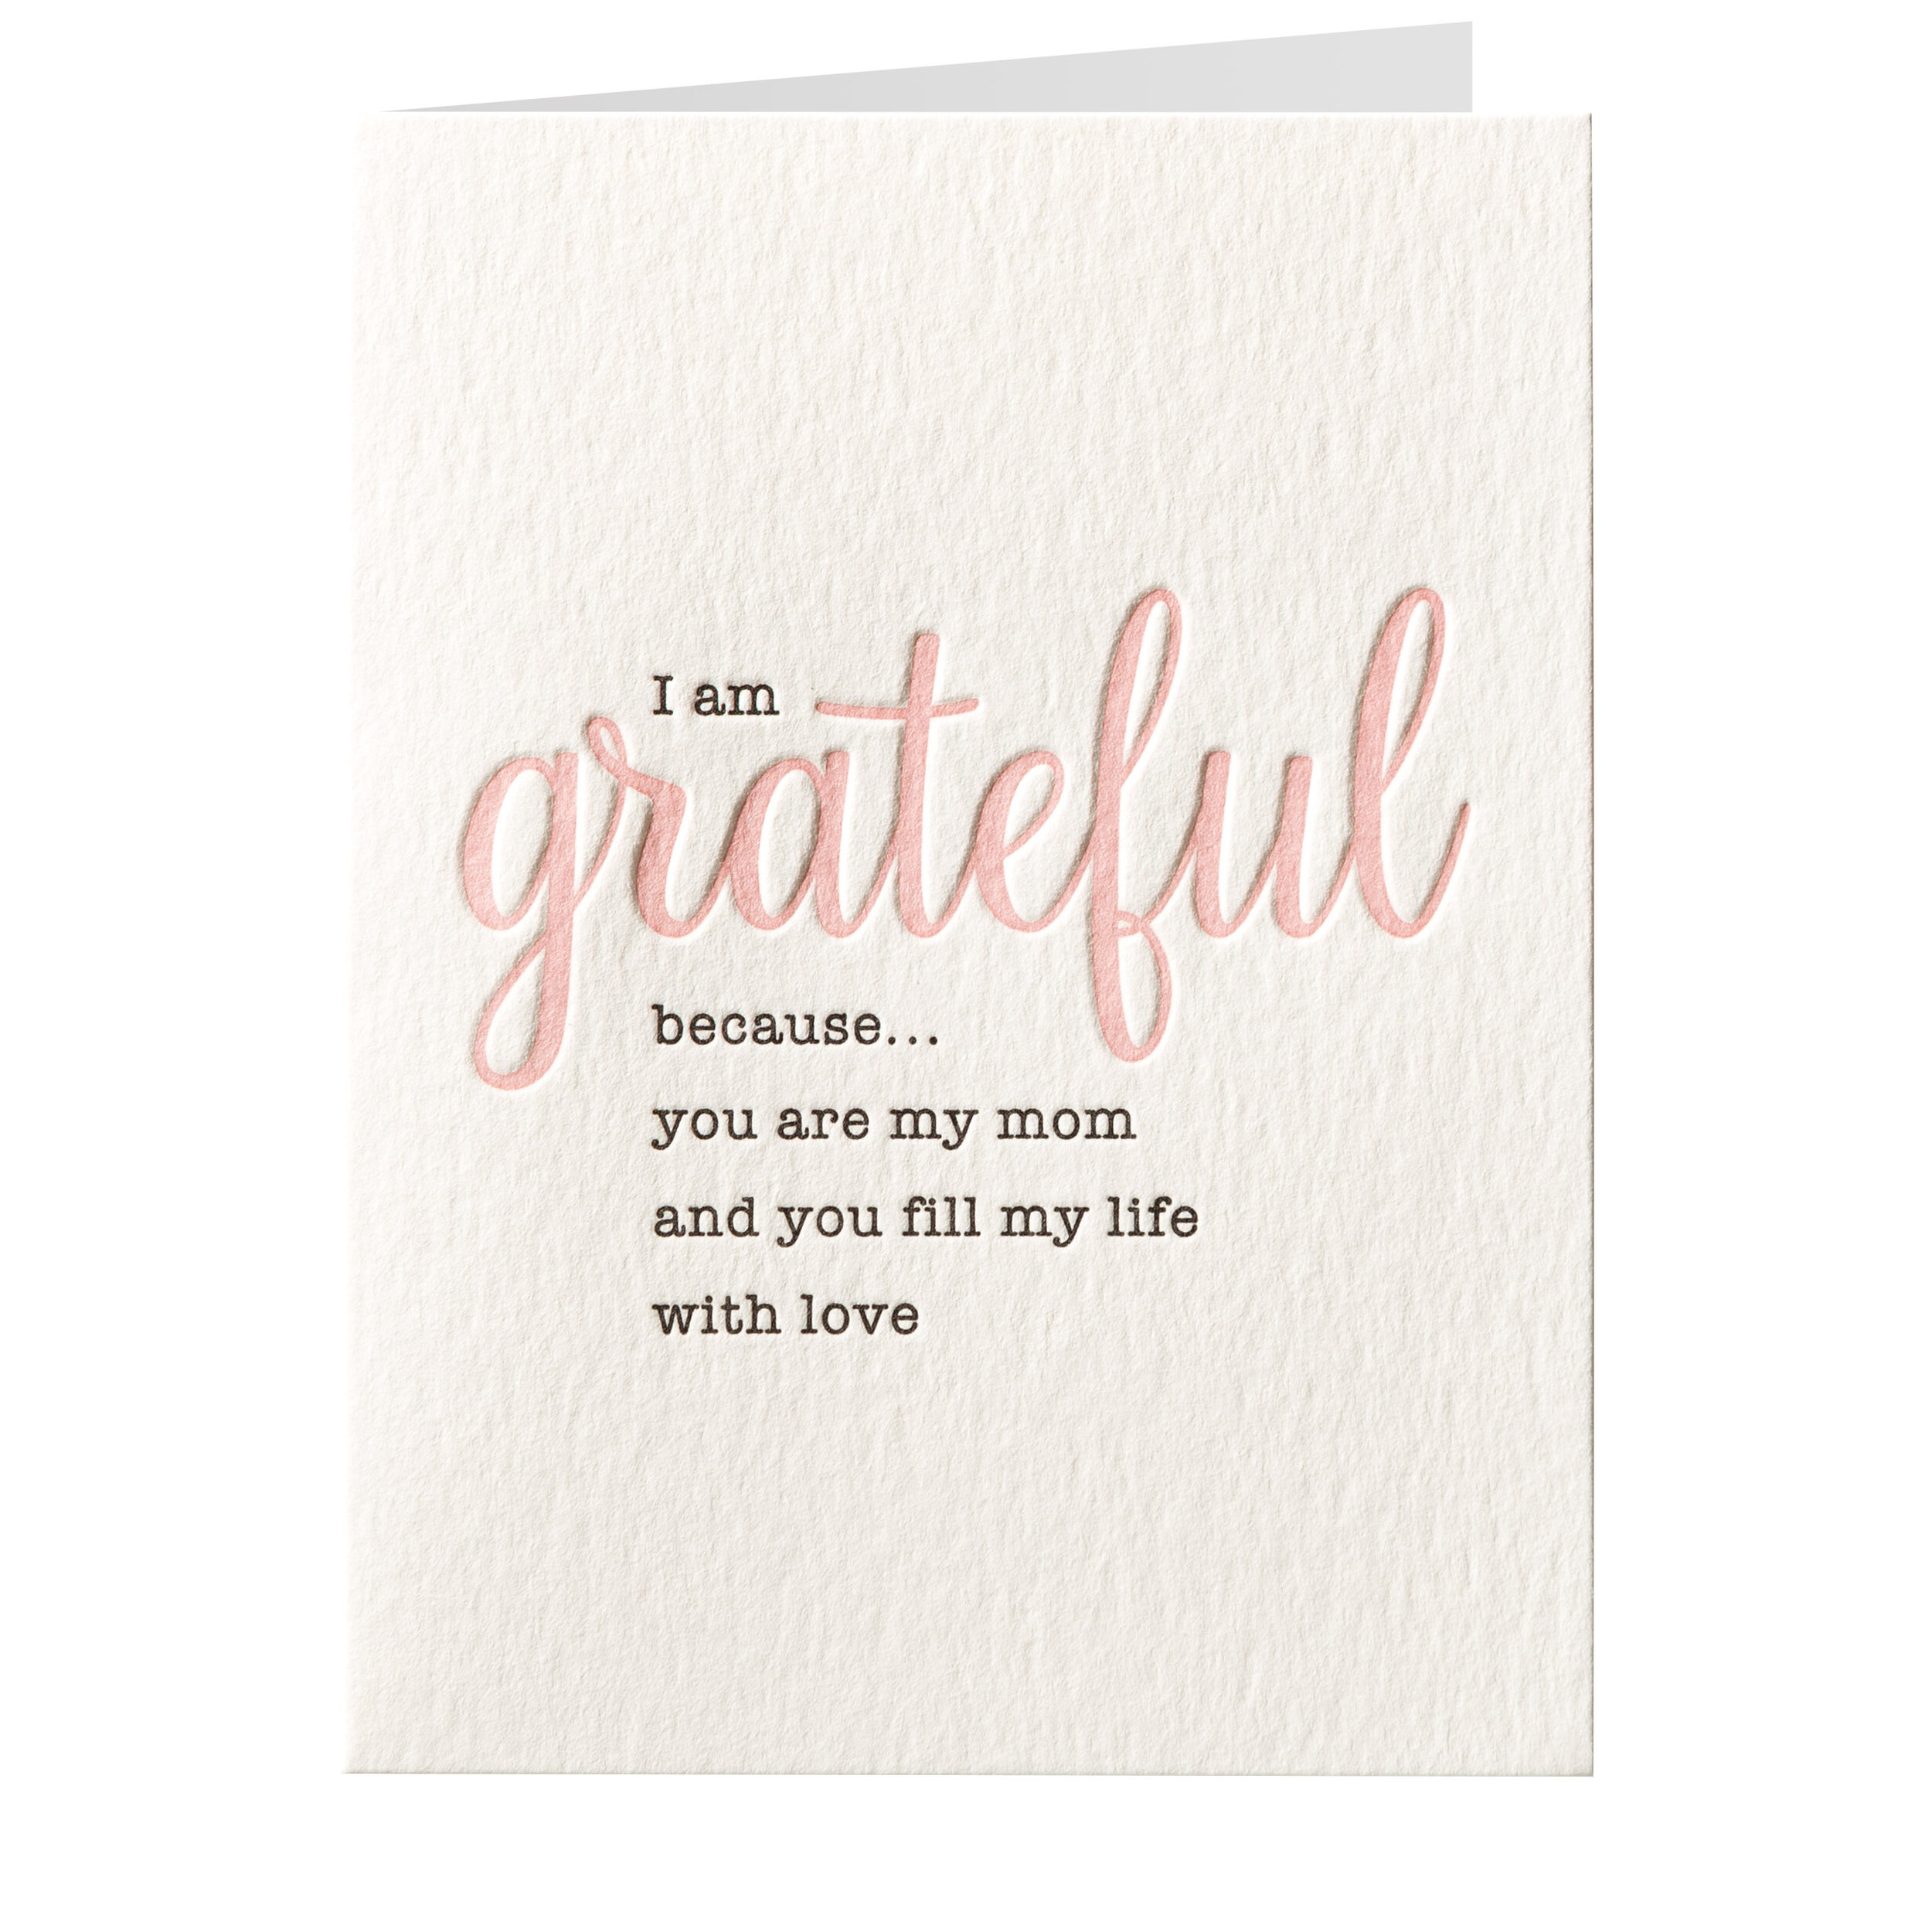 Buy Grateful Mom Birthday Card — Larkwood Studio Buy Stationery and  Greeting Cards - The gift of personal expression